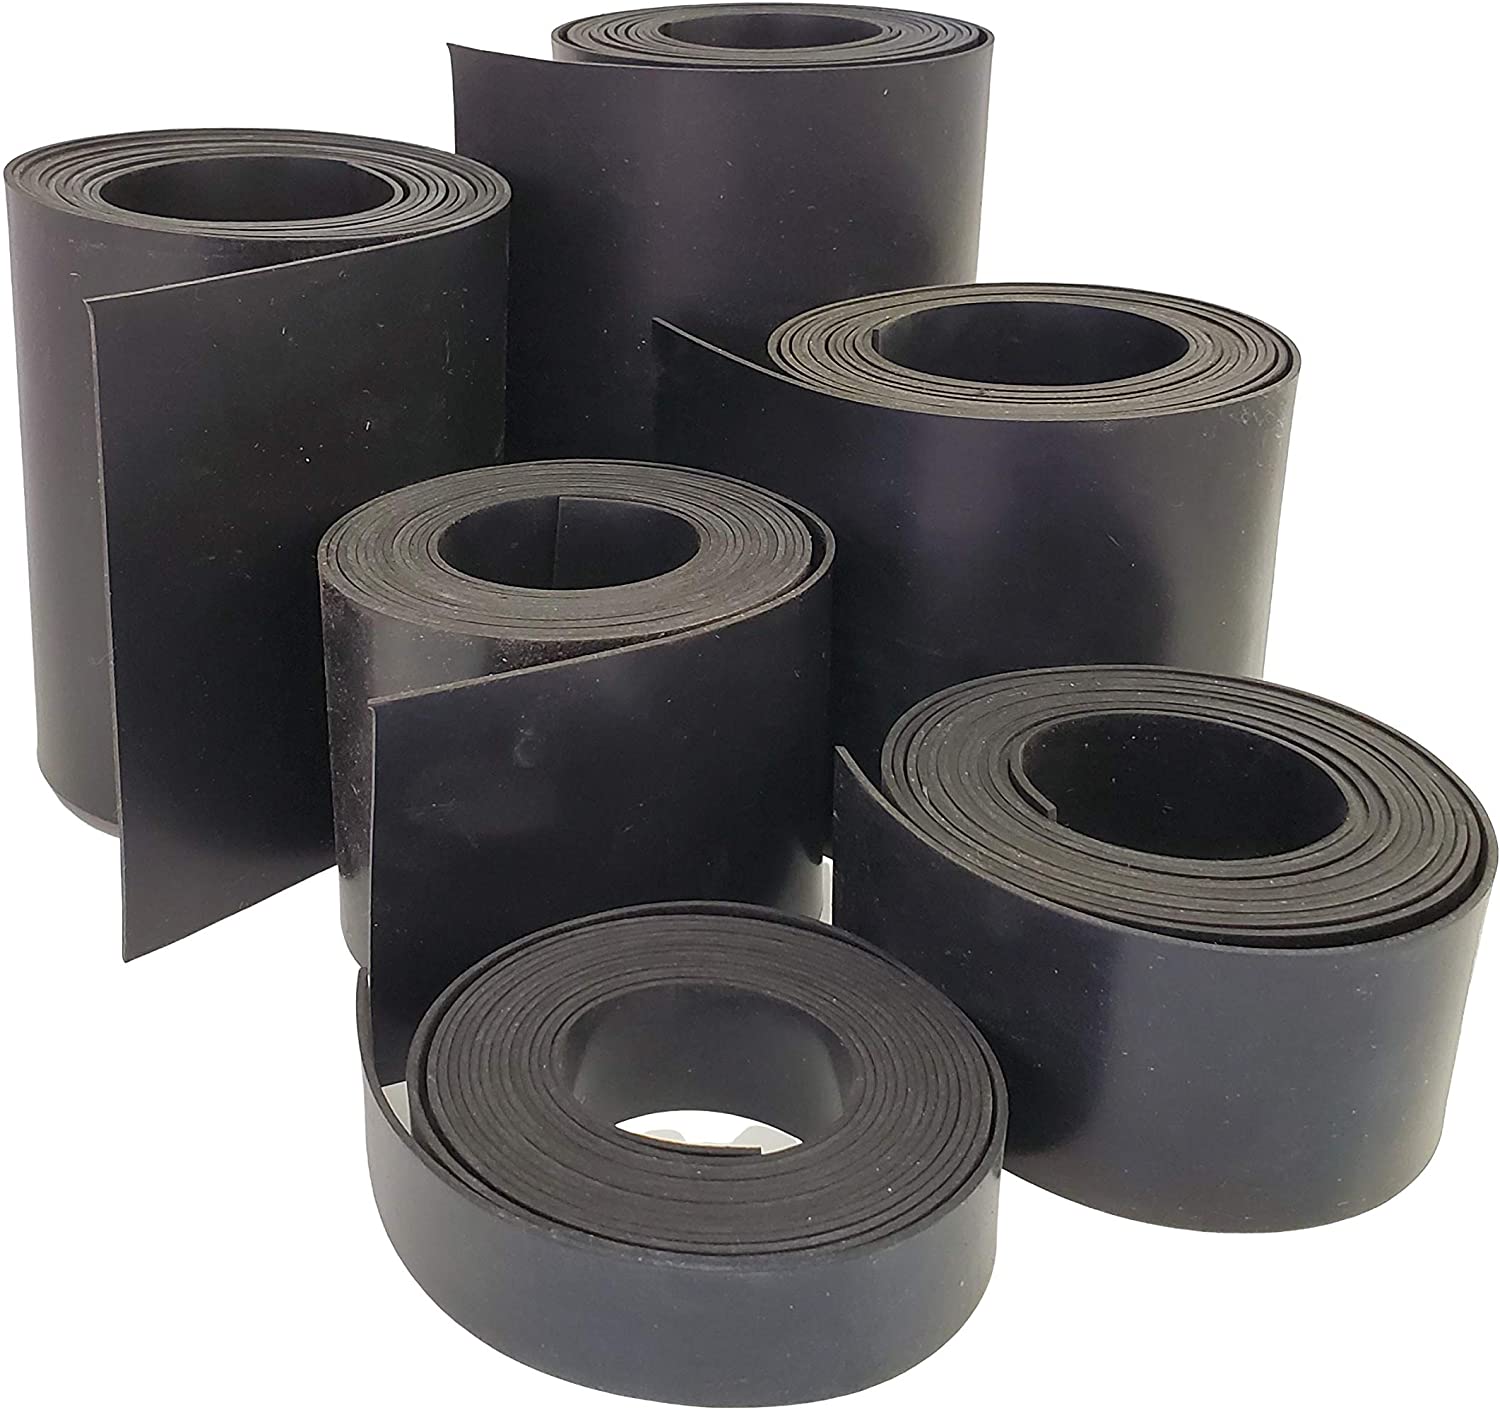 Adhesive Silicone Rubber Strips,Solid Rubber Sheet Rolls Pad